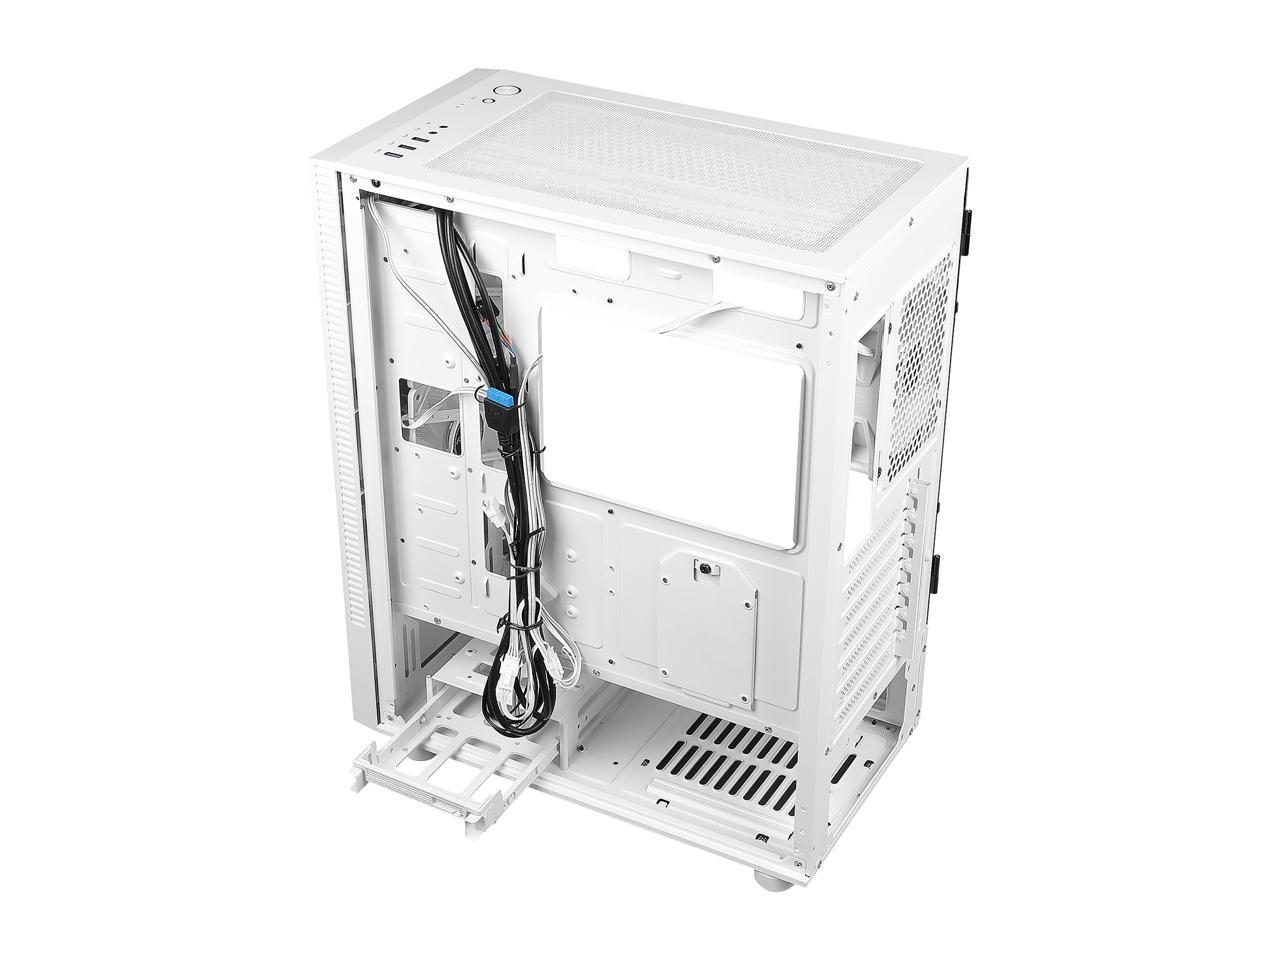 Antec NX Series NX410 White, 2 x 140mm & 1 x 120mm ARGB Fans Included,  360mm Radiator Support, Mesh Front Panel & Swing-Open Tempered Glass Side  Panel 